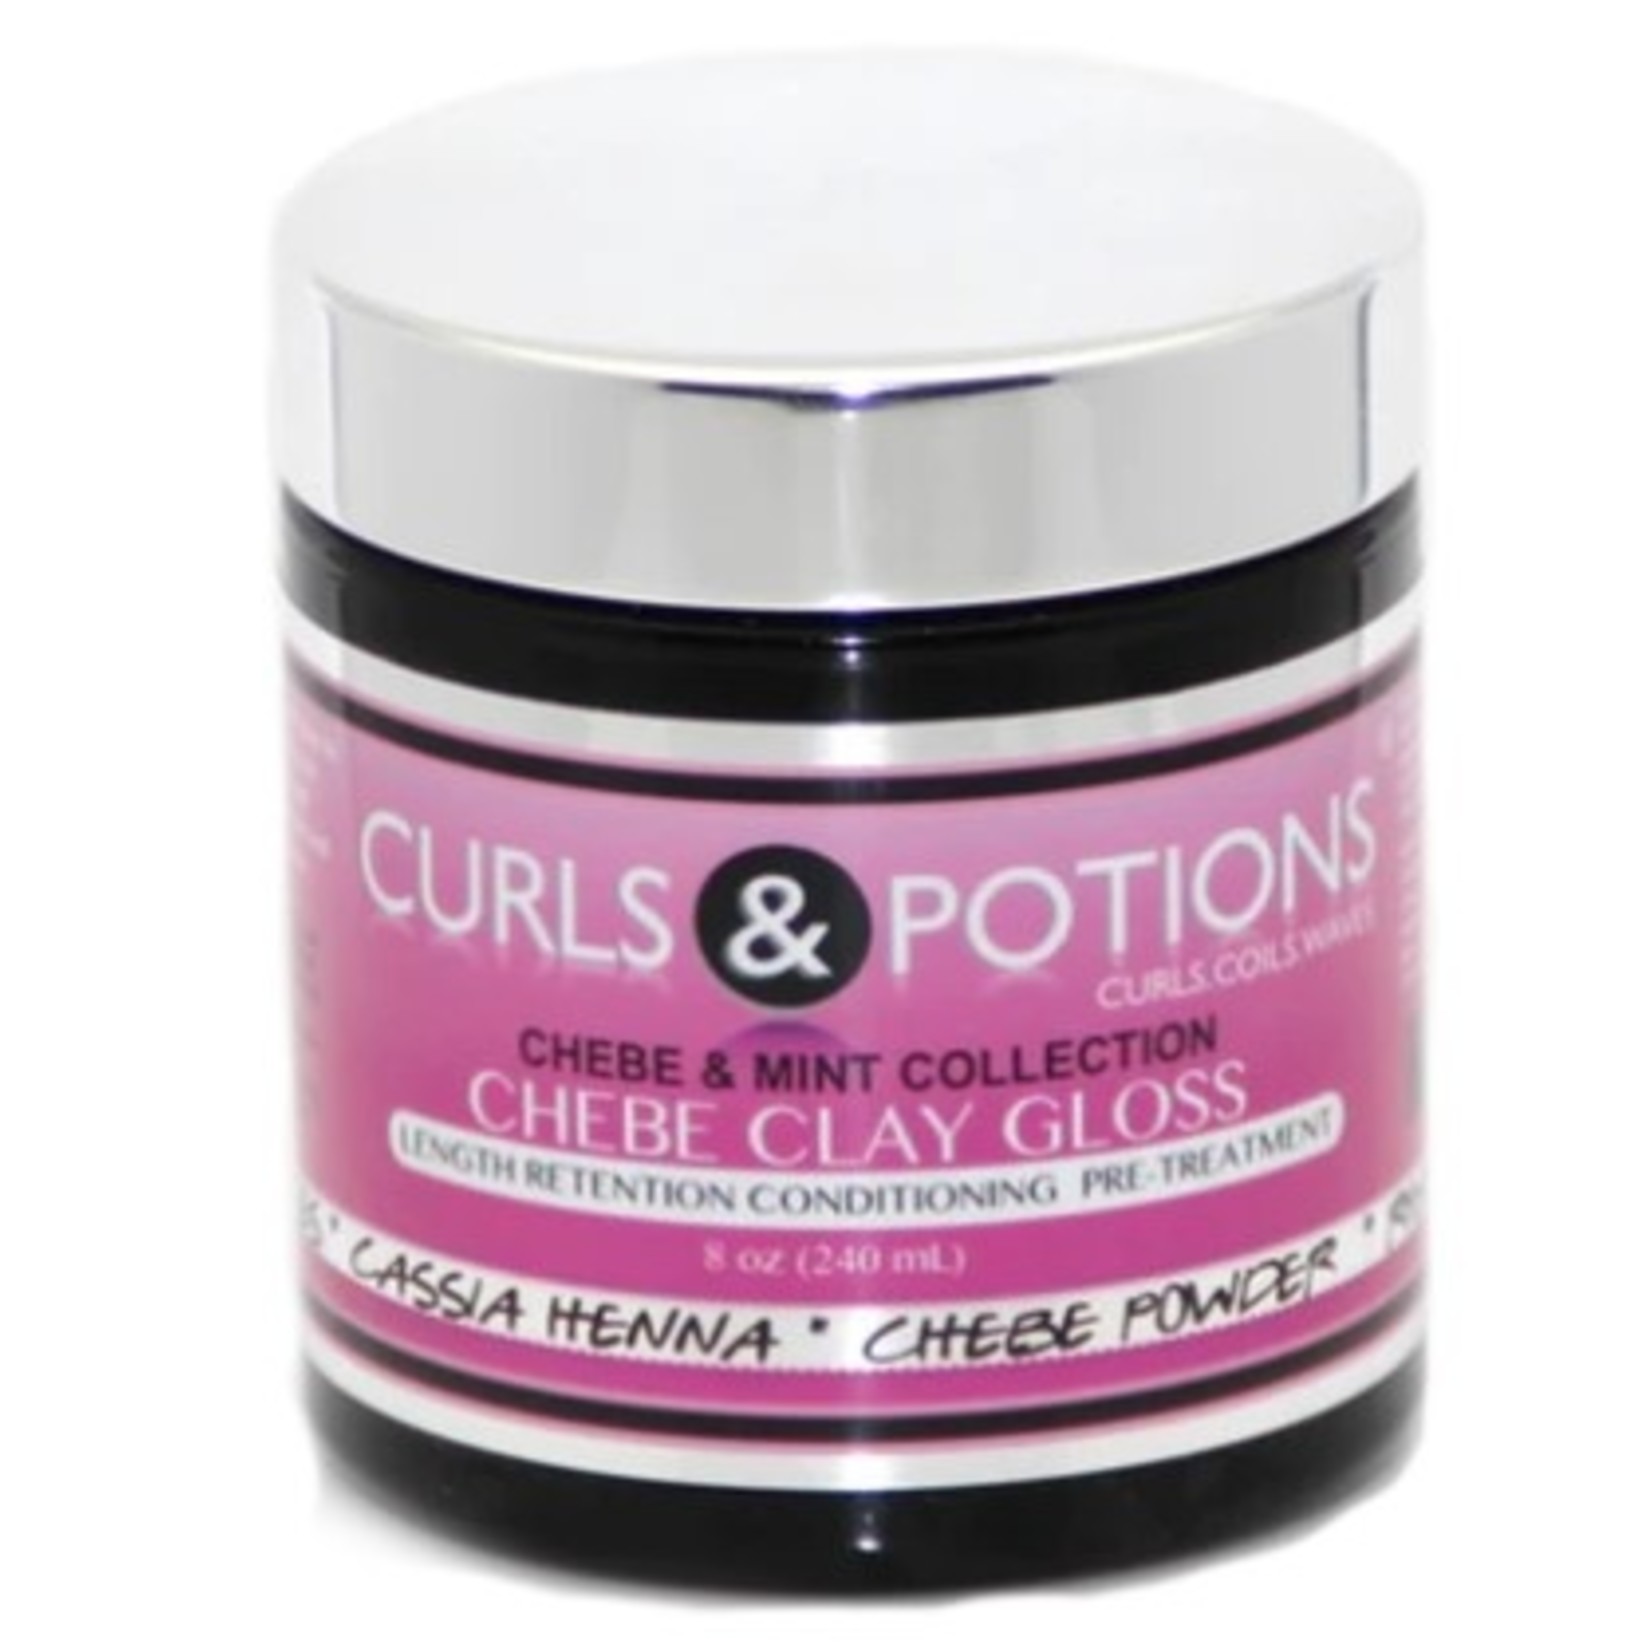 Curls & Potions Curls & Potions Angel's Chebe Clay Gloss